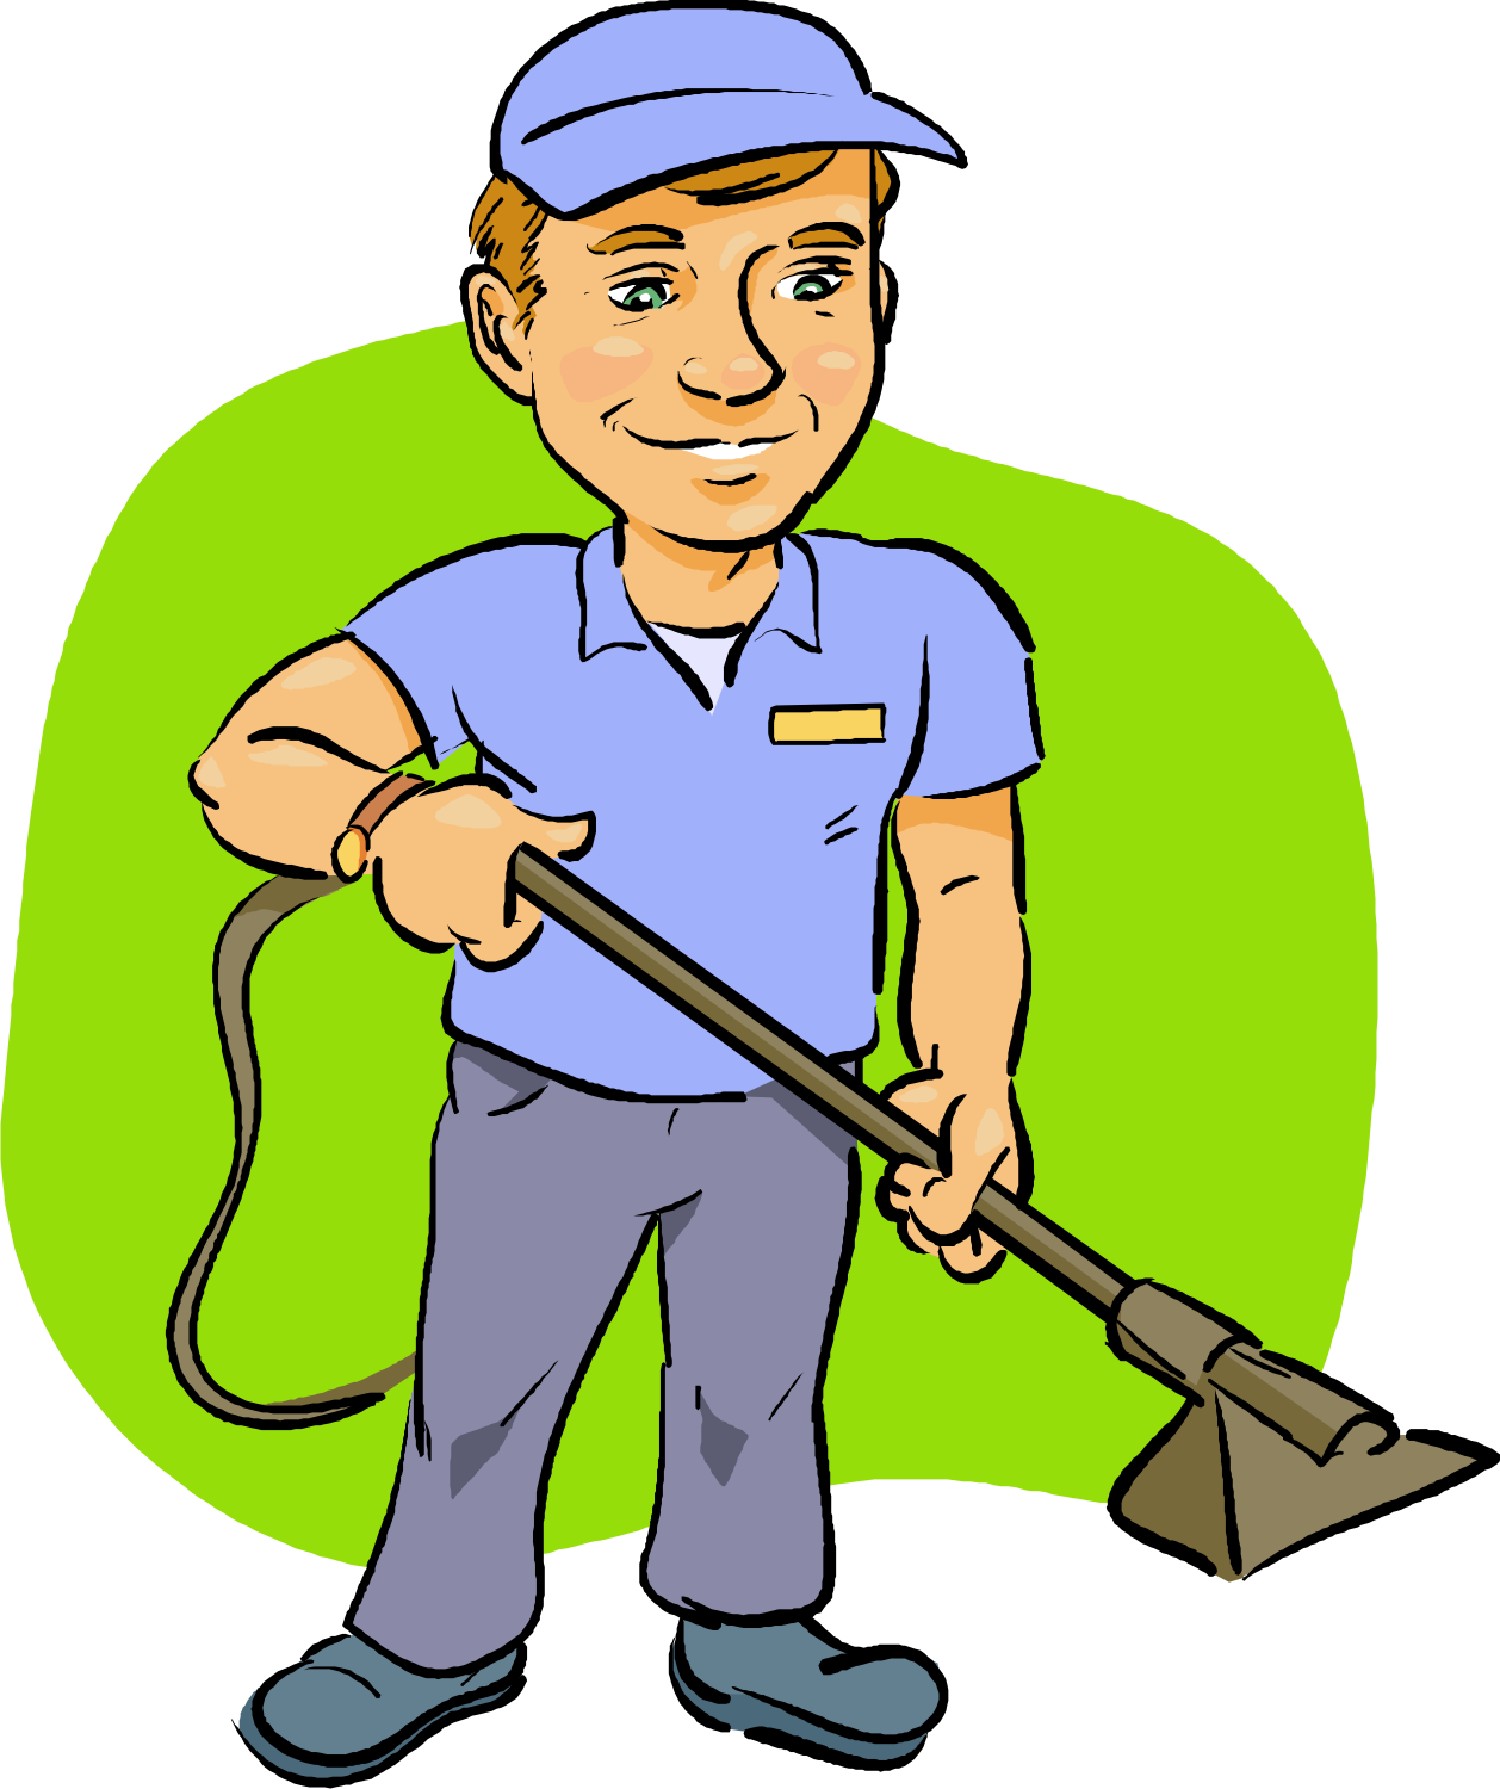 Free Cartoon Janitor, Download Free Cartoon Janitor png images, Free